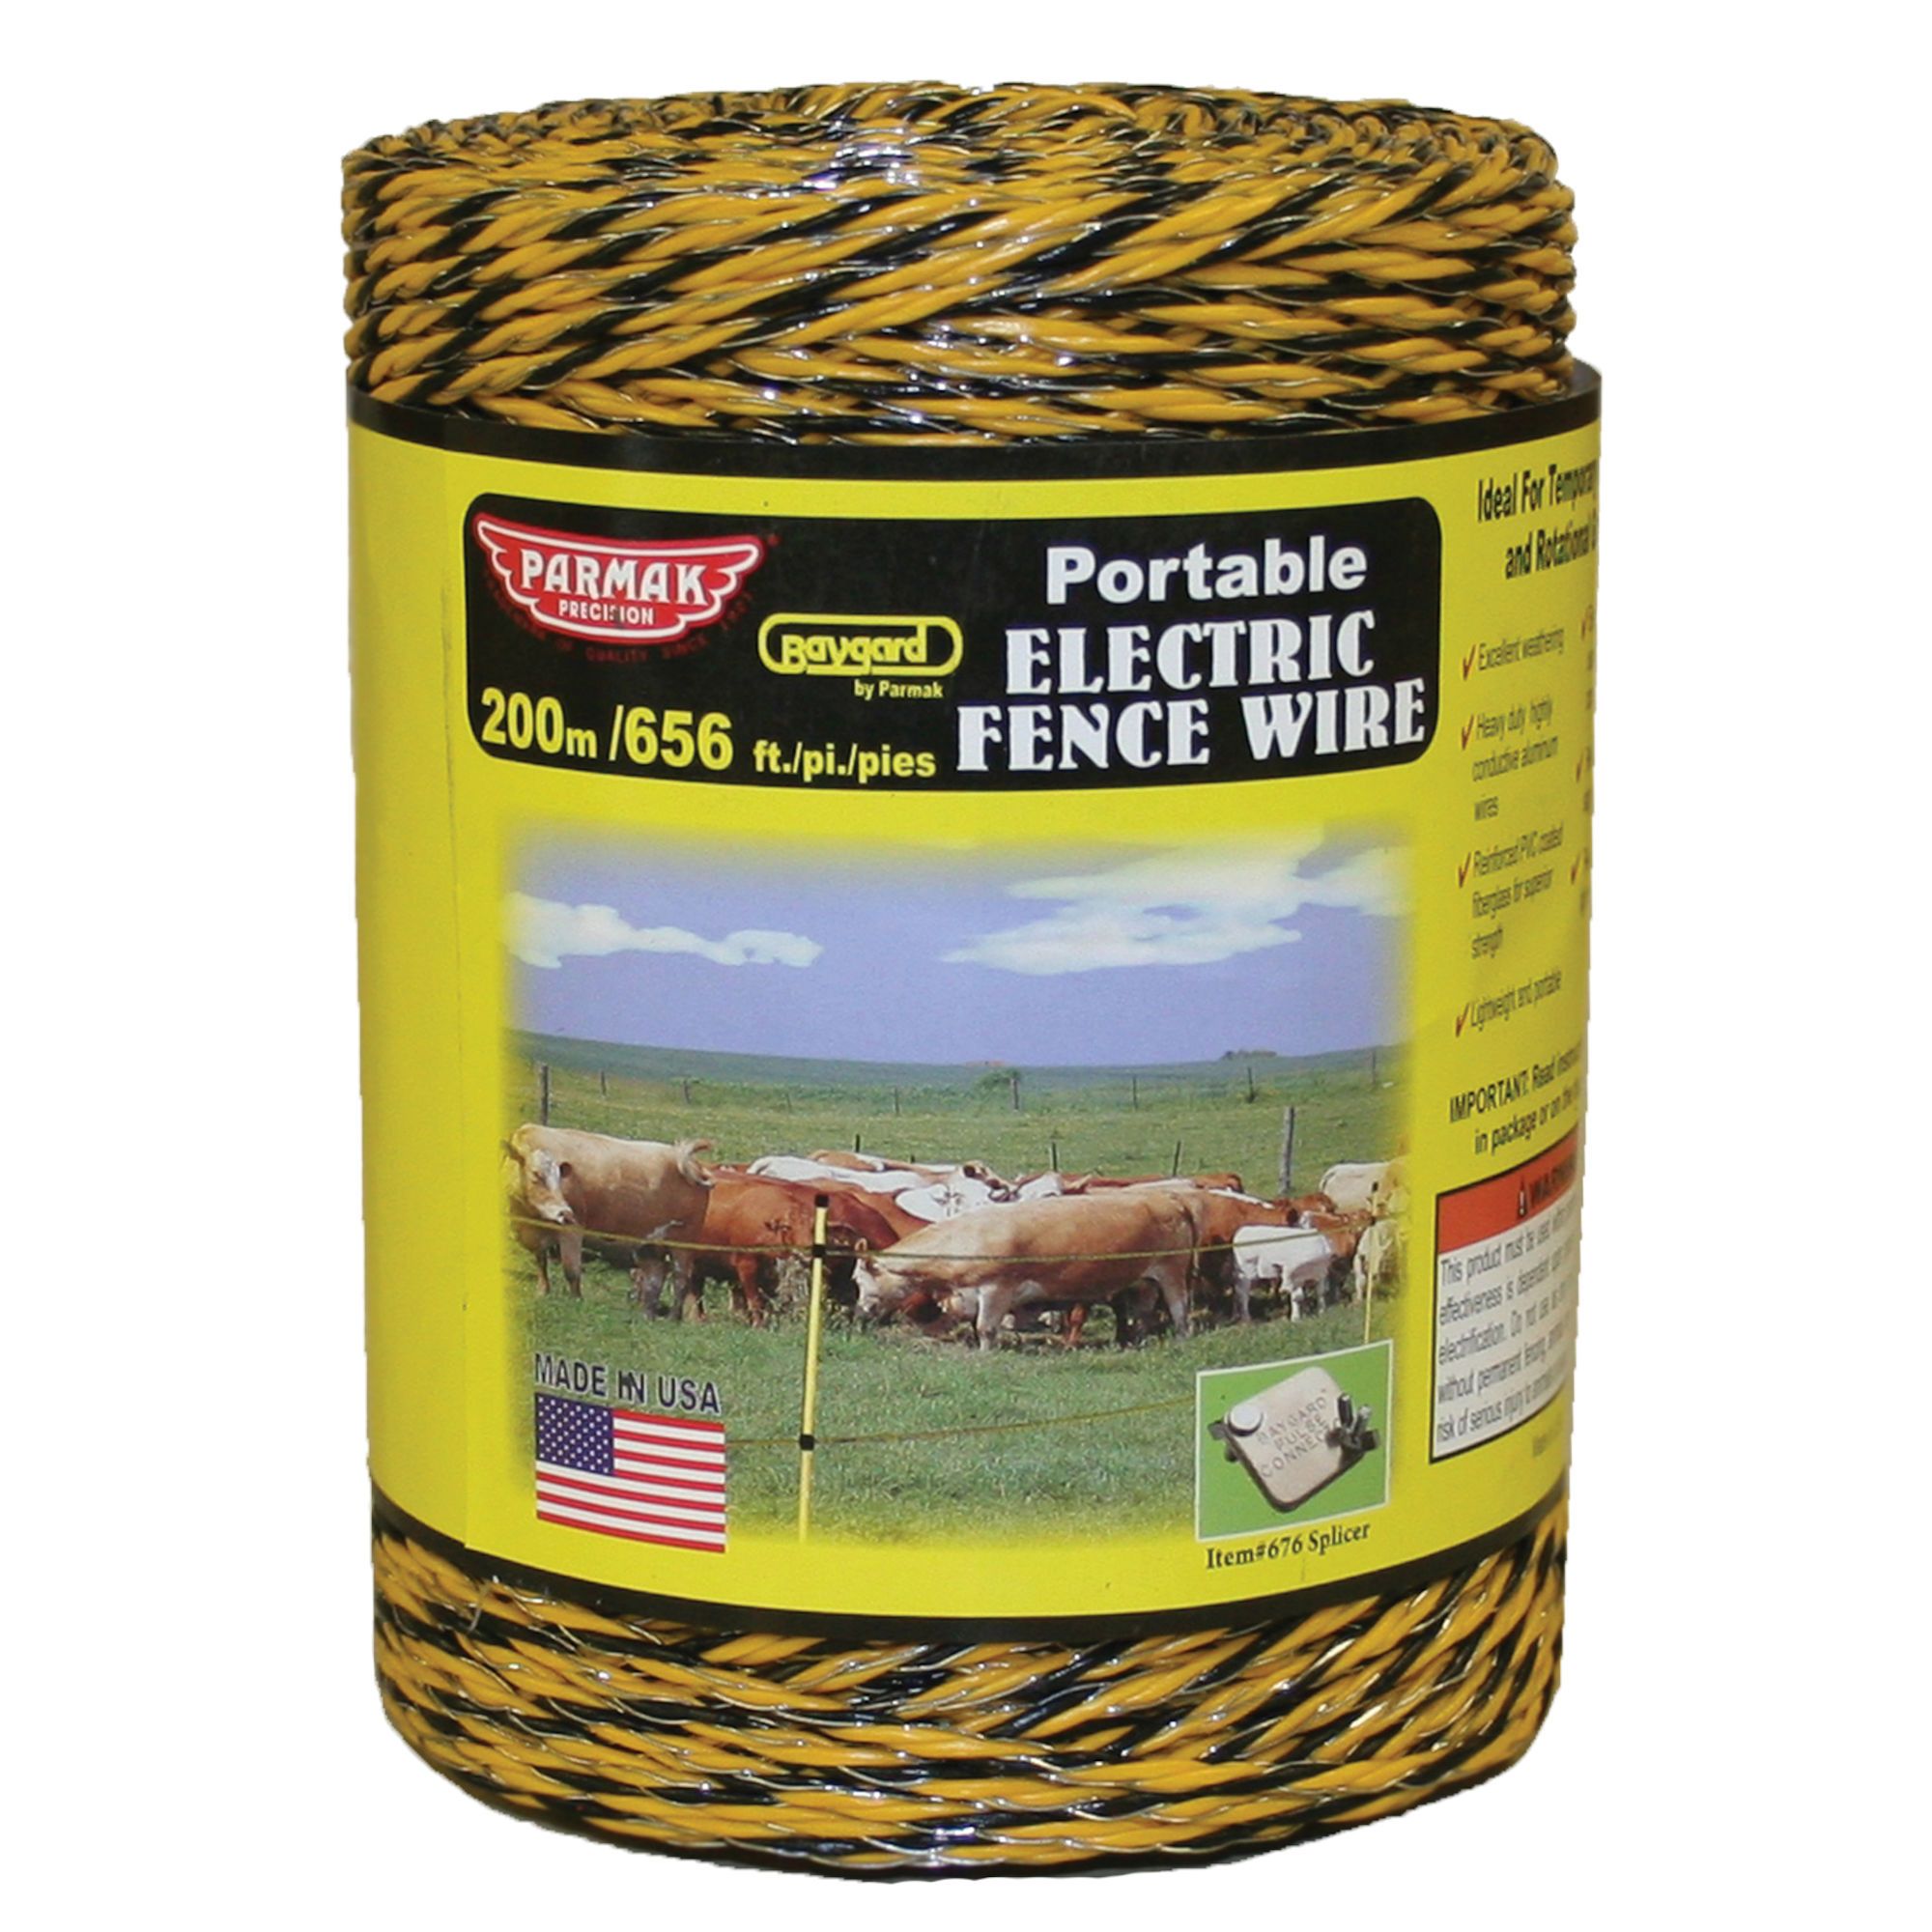 Electric Fence Polywire 200m 656' Garden Yard Pet Animal Pasture Enclosure 